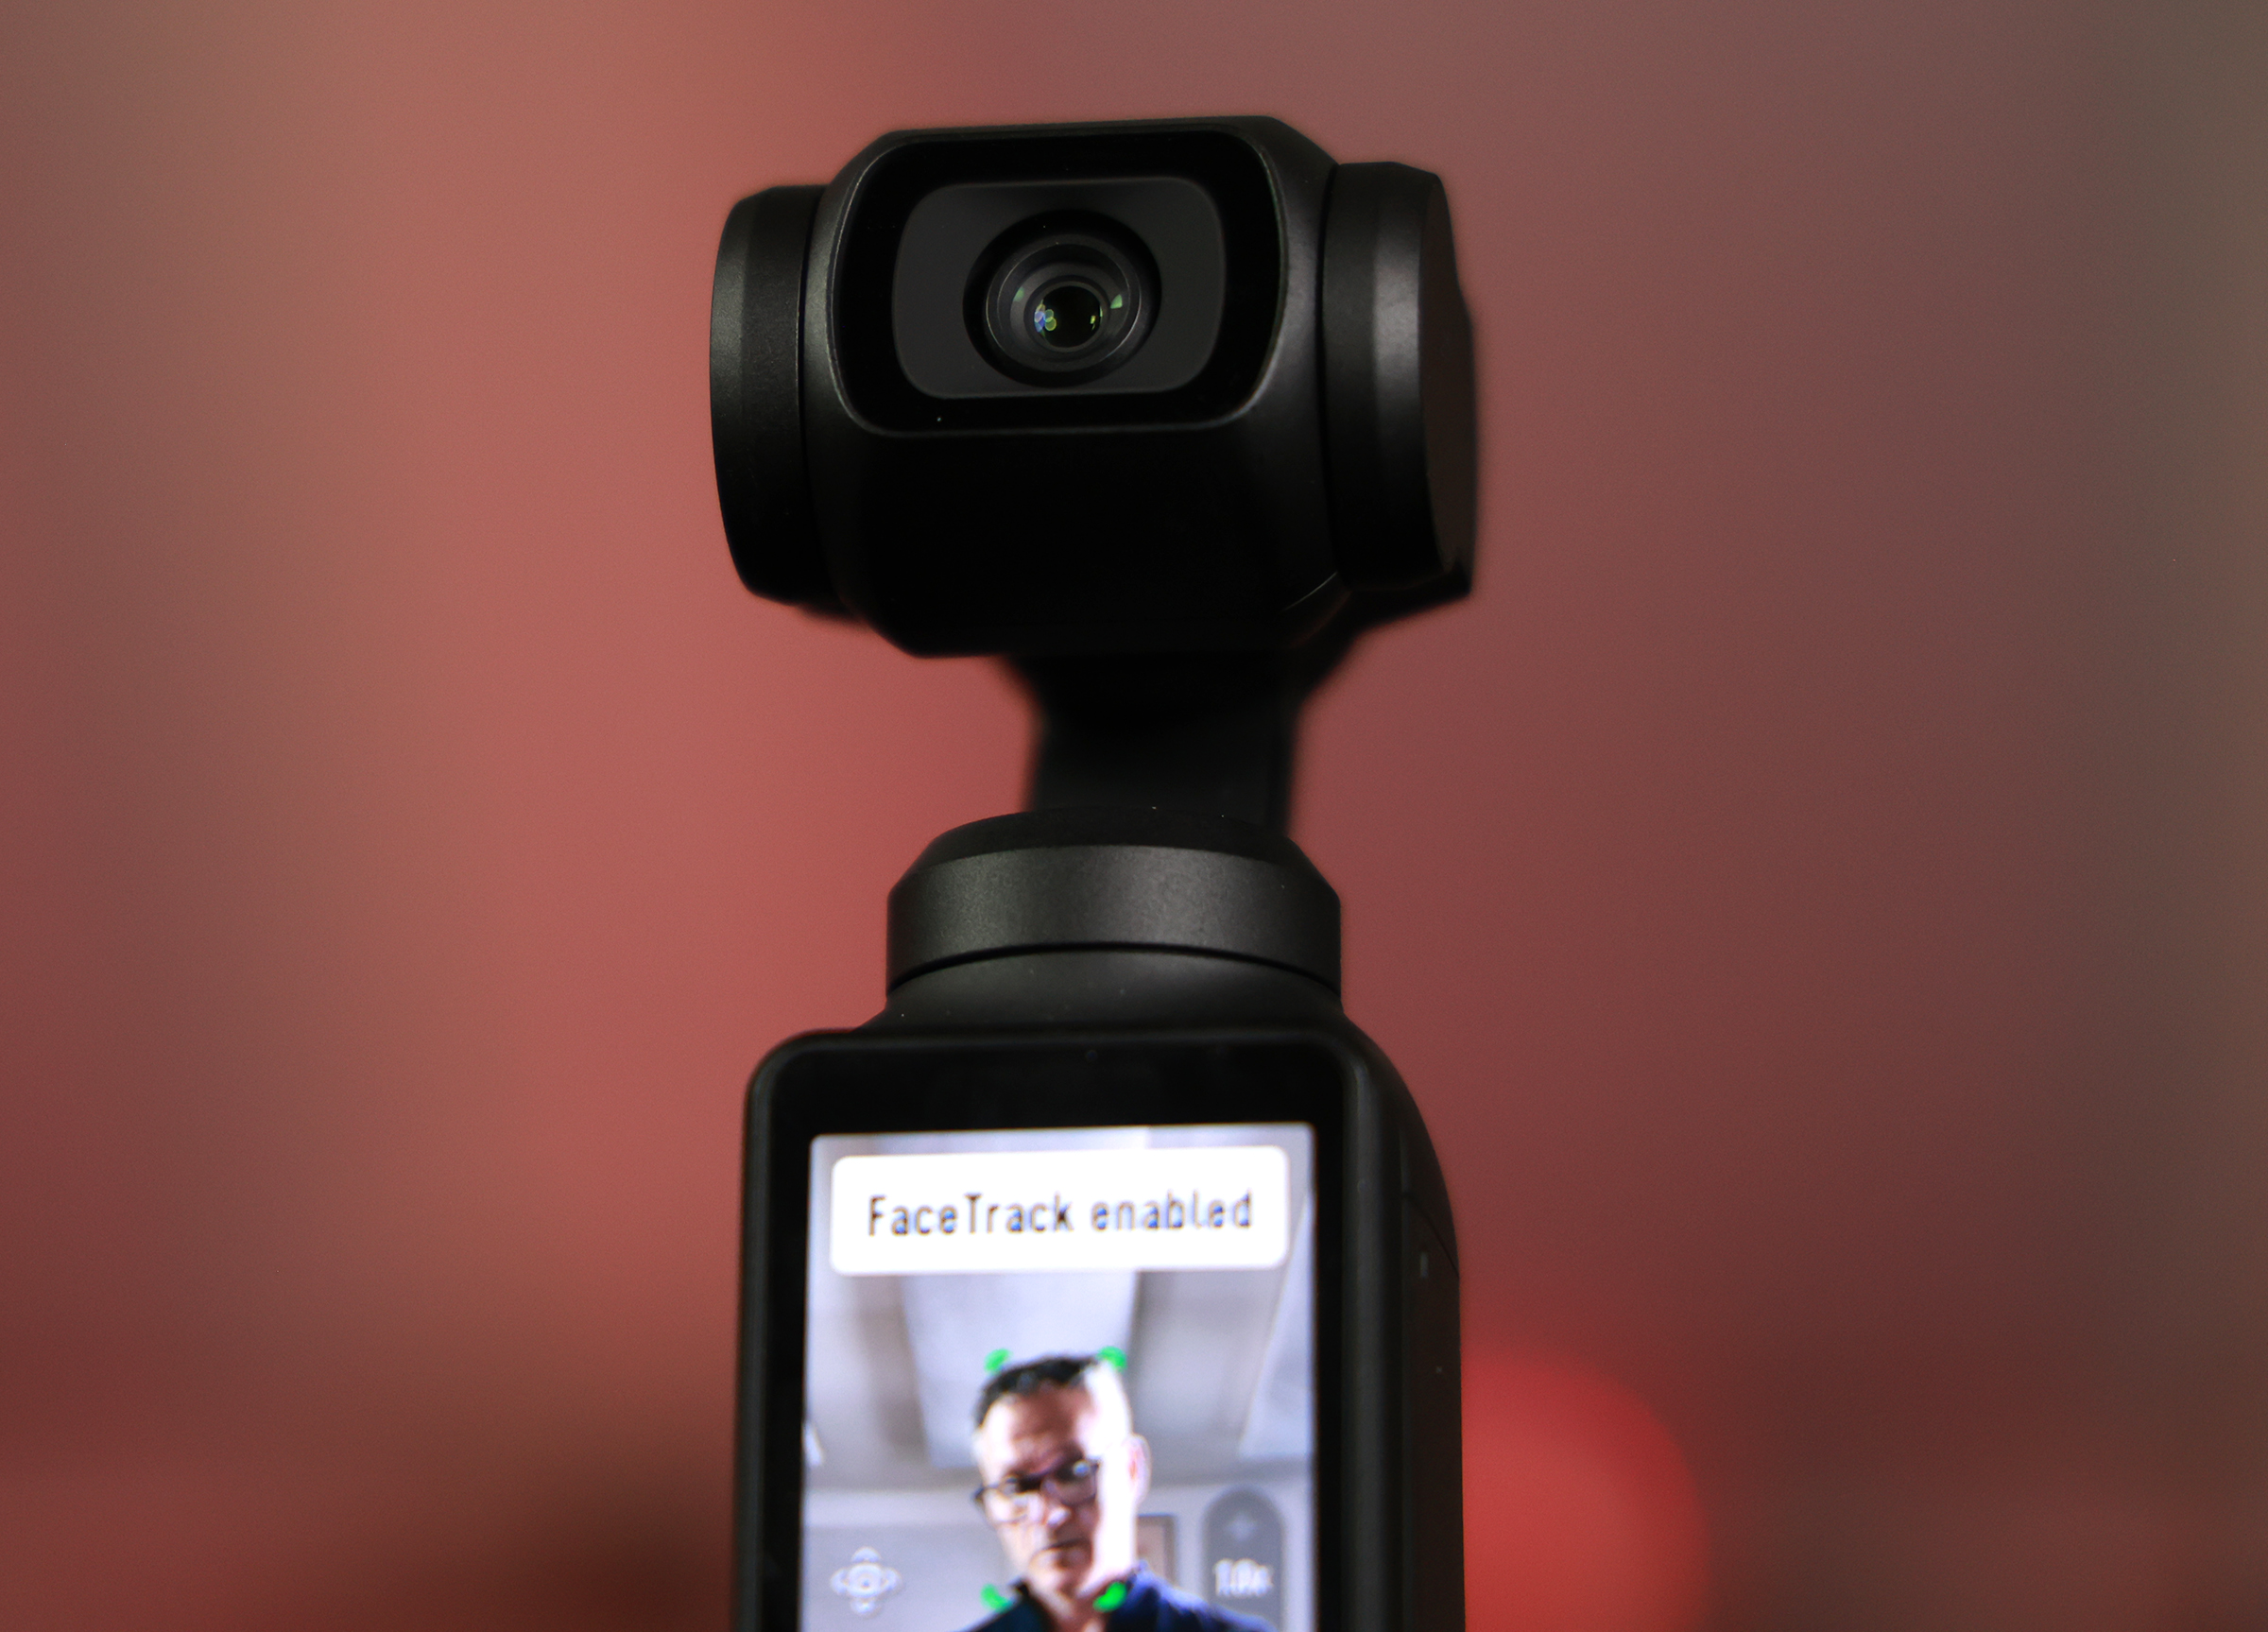 DJI's Osmo Pocket 3 features a 1-inch sensor and a rotating display